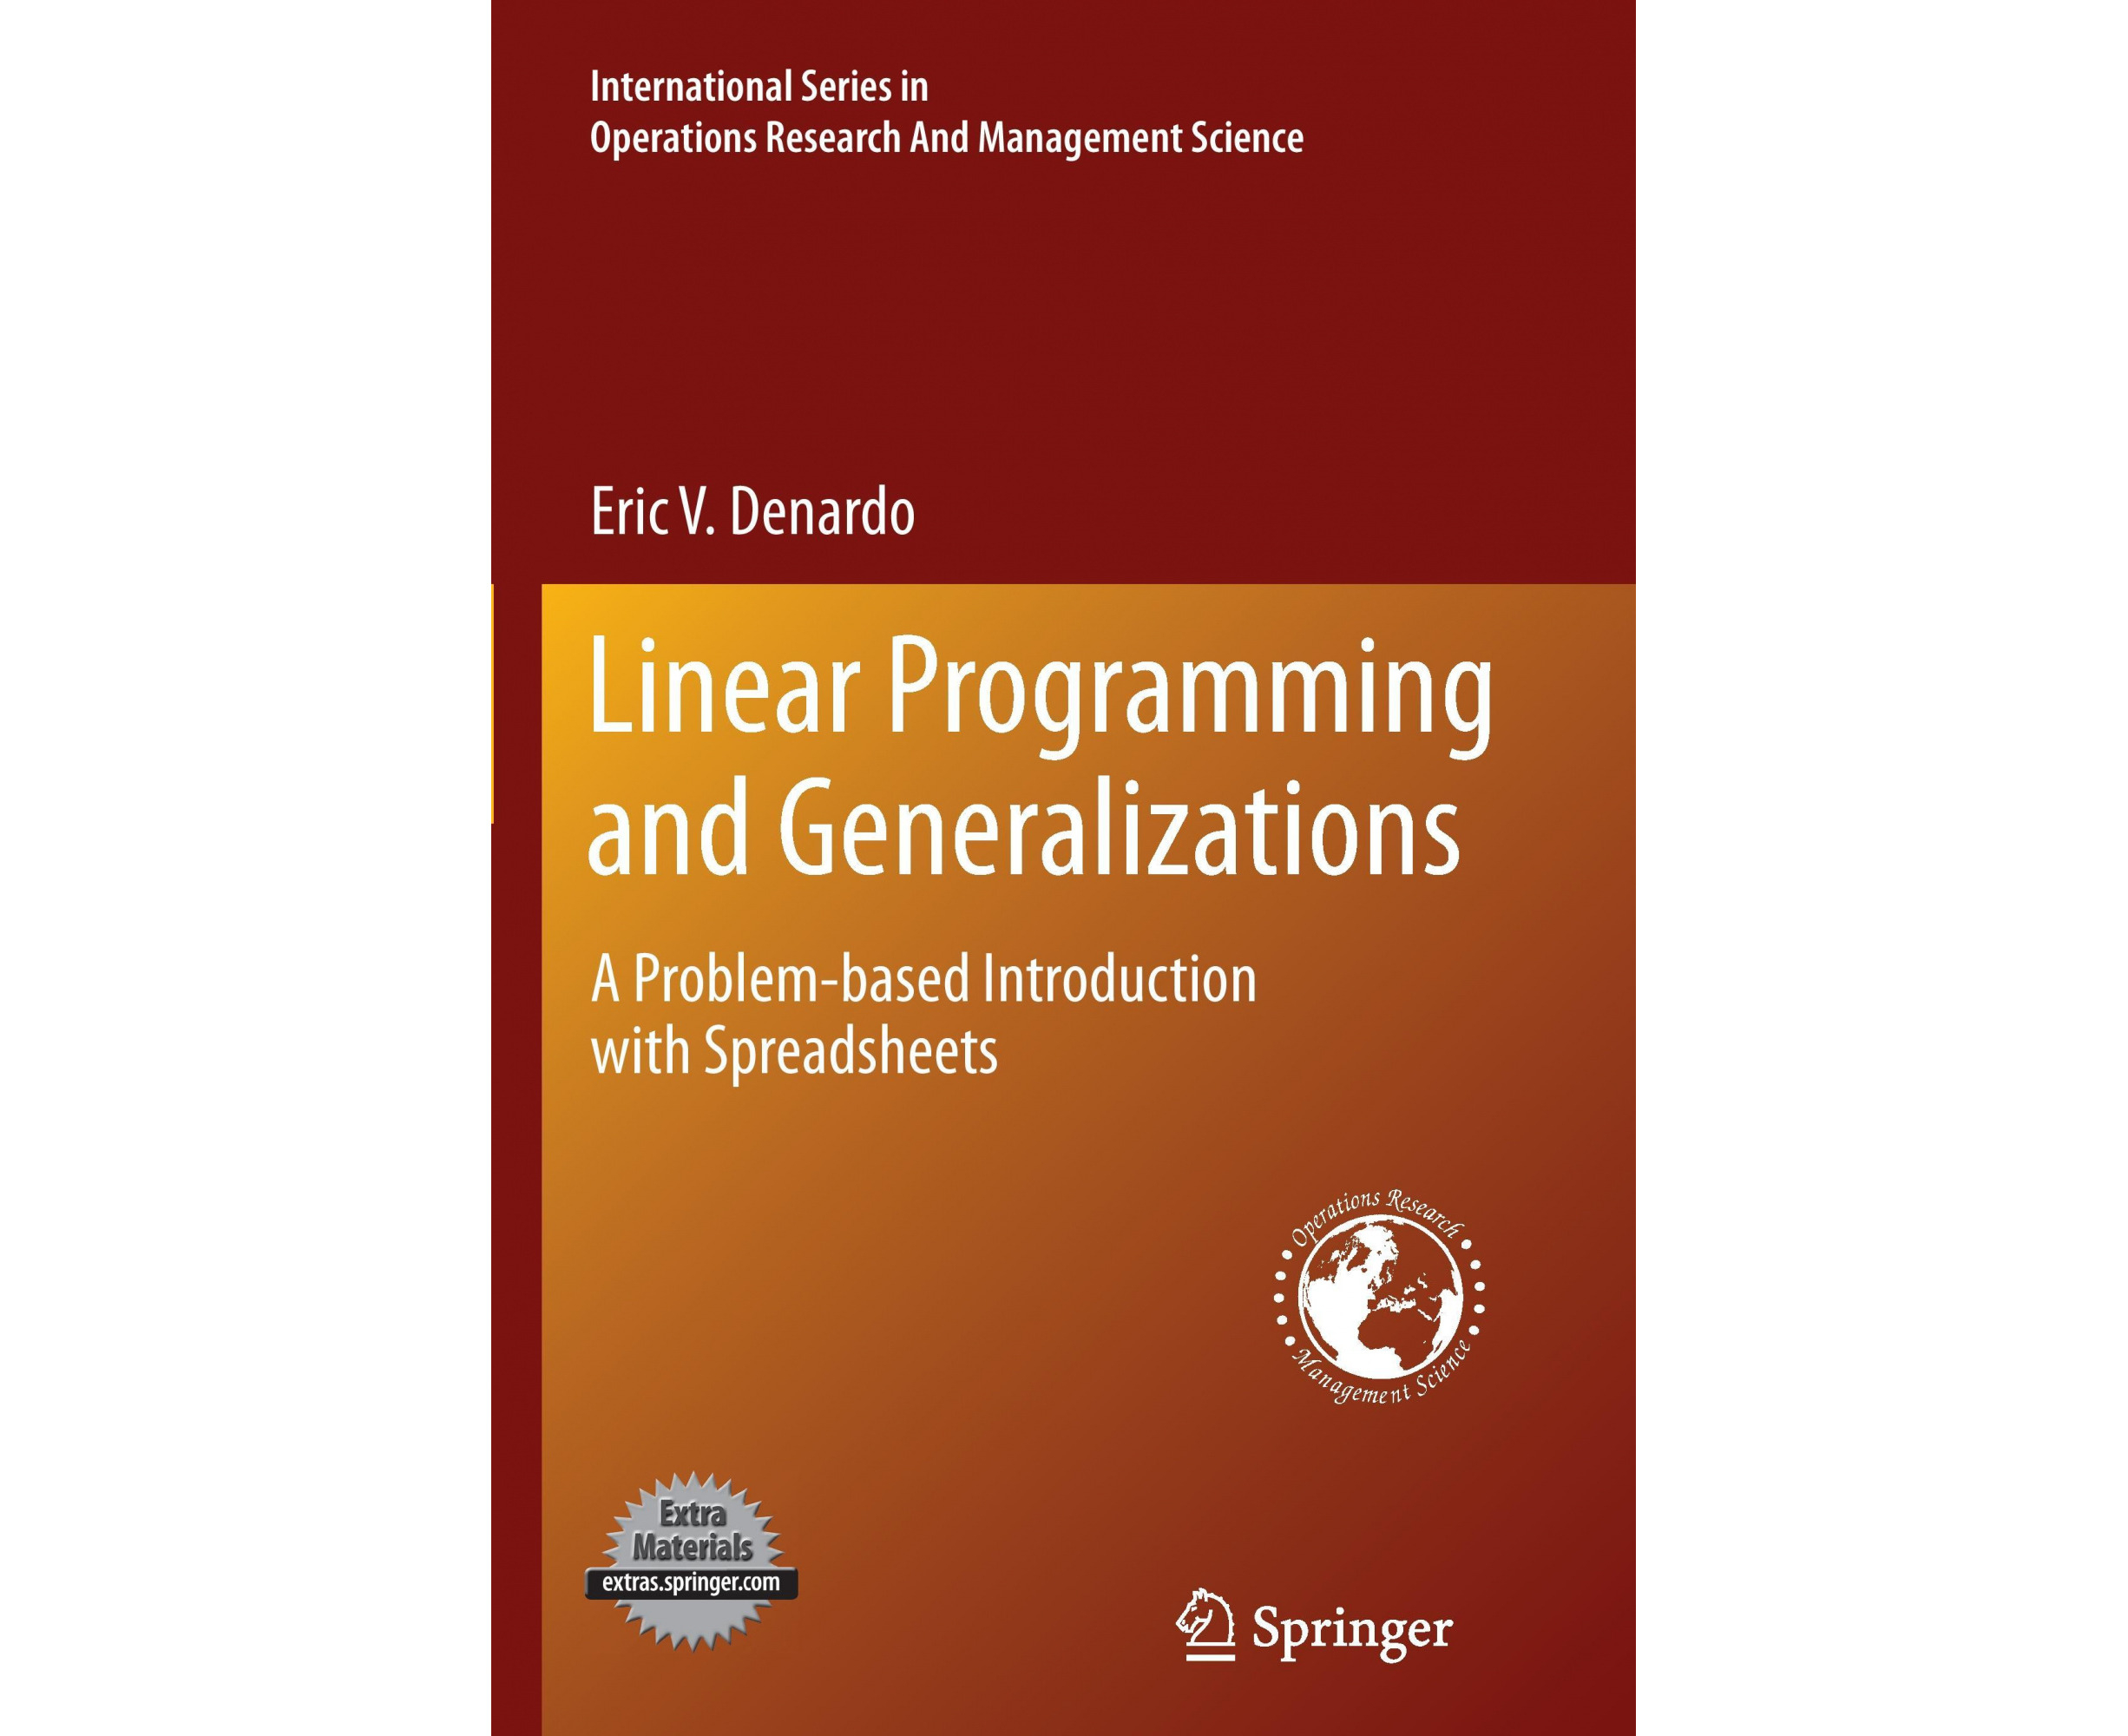 Series　Linear　Management　in　with　Research　Programming　(International　A　Operations　and　Generalizations:　Spreadsheets　Problem-based　Introduction　Science)